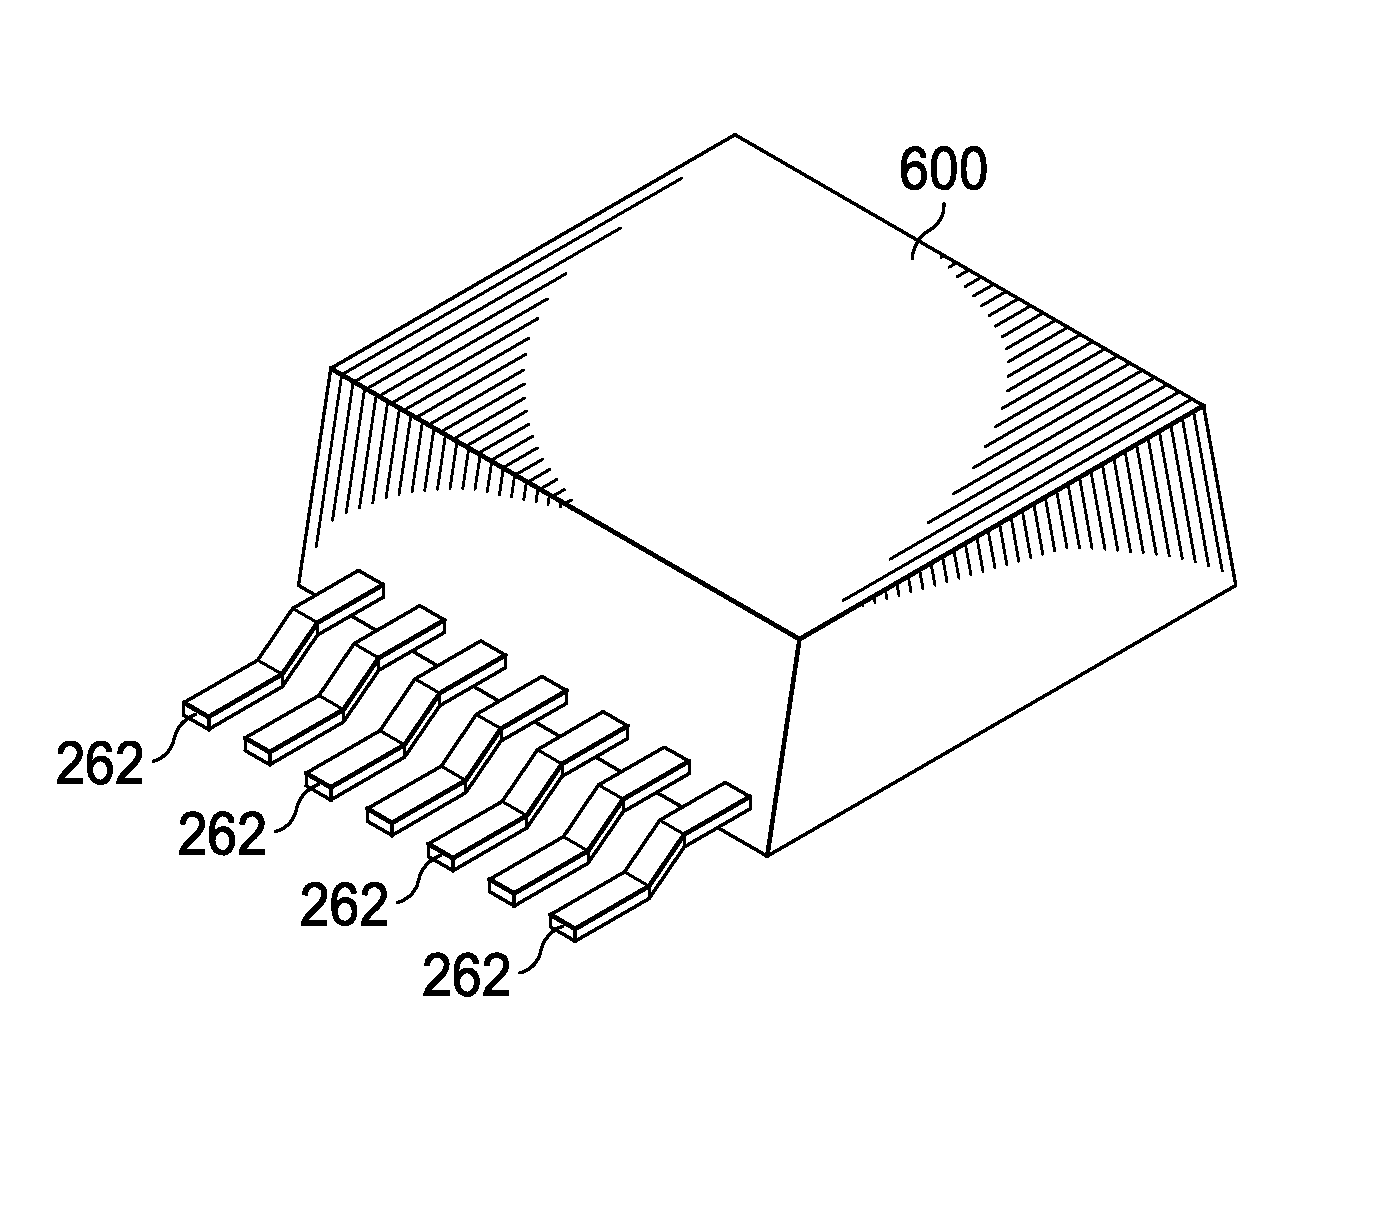 Flippable leadframe for packaged electronic system having vertically stacked chips and components